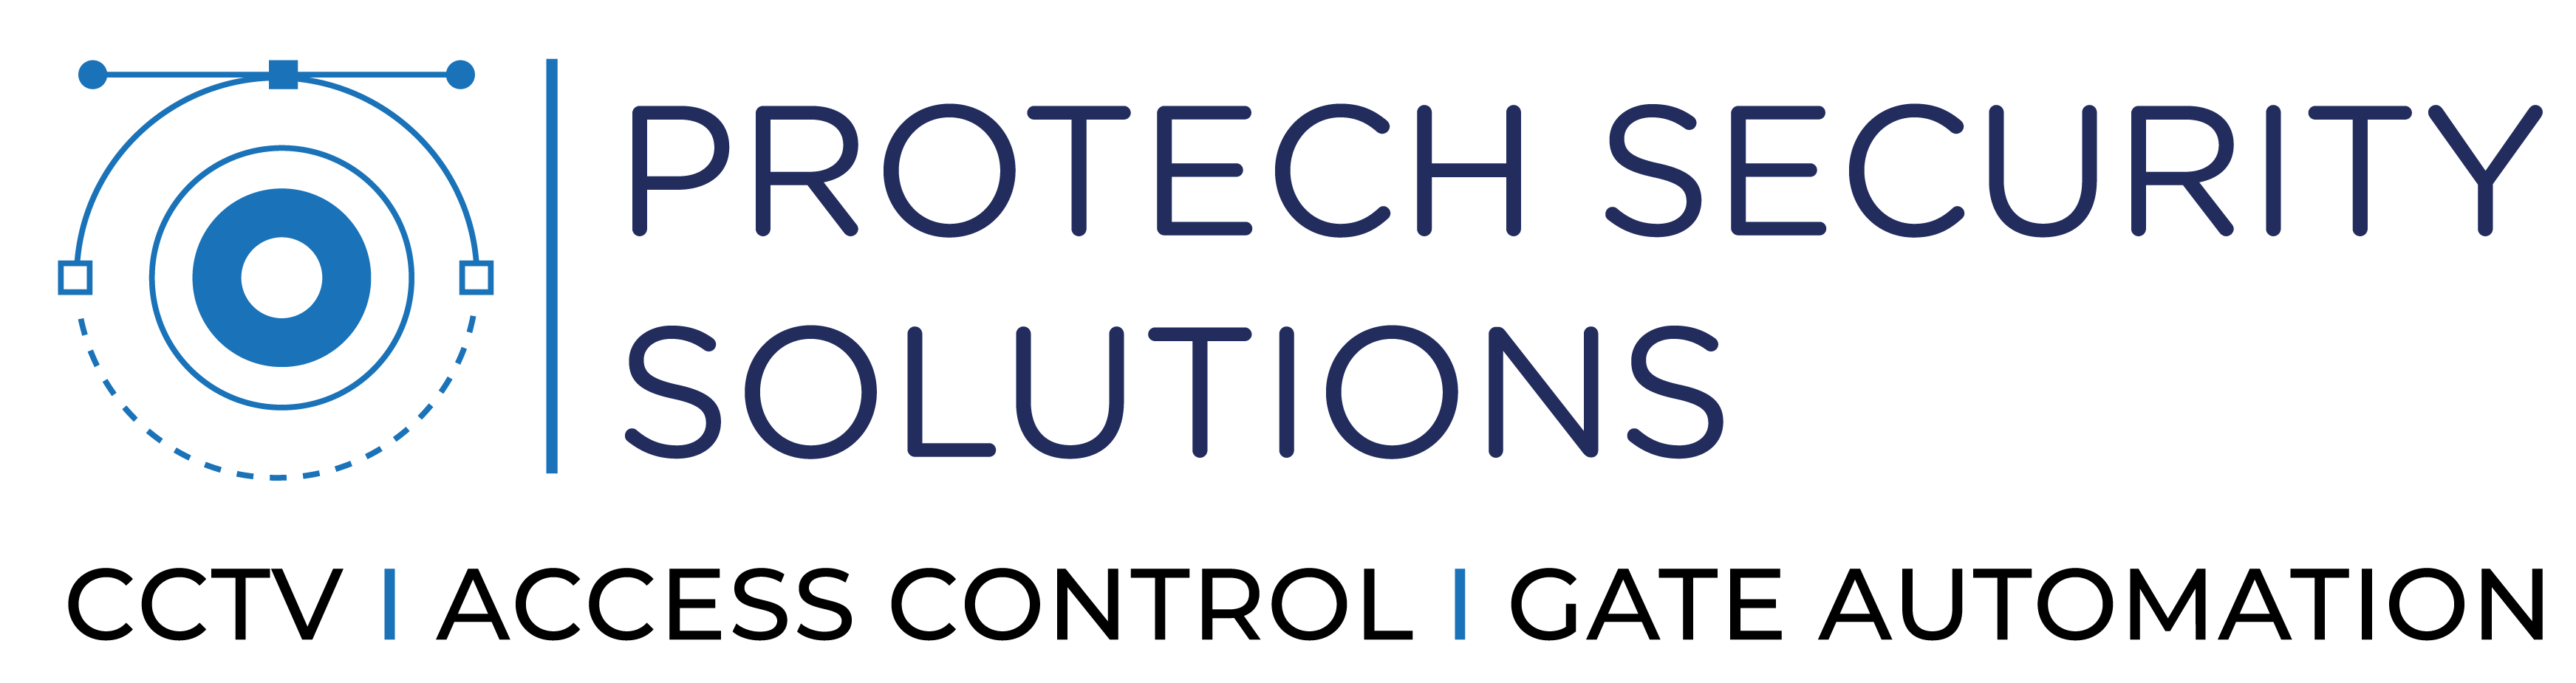 Protech Security Solutions